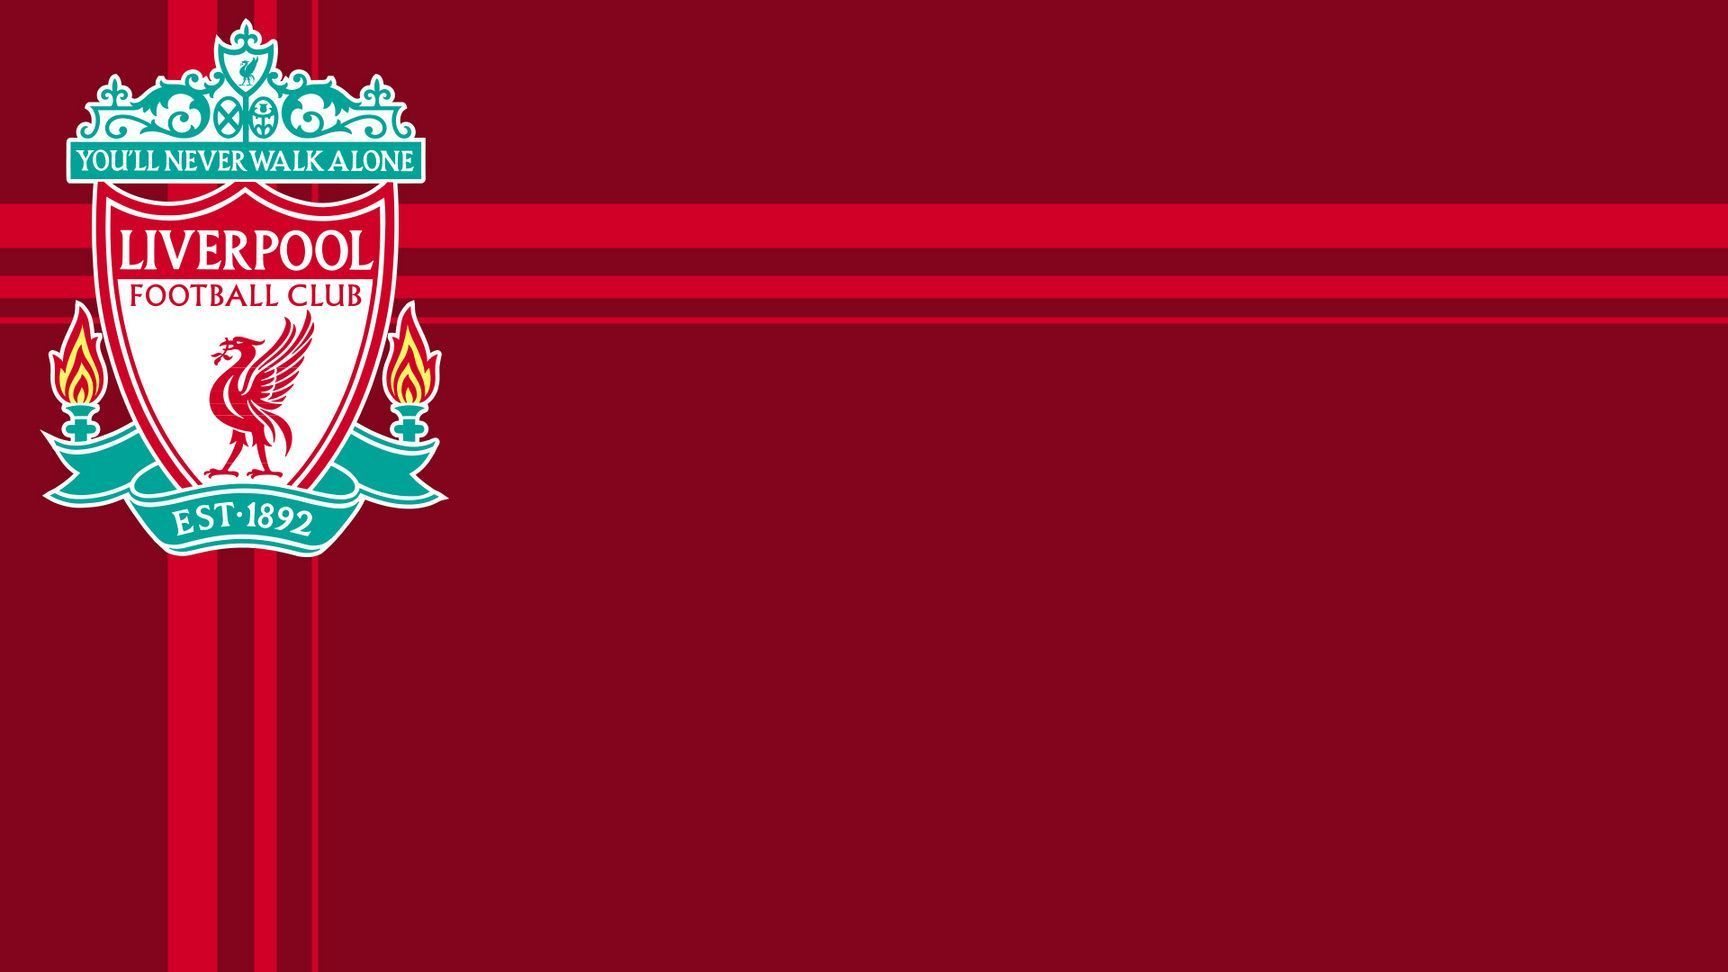 Liverpool FC Wallpaper and Backgrounds | English Premier League